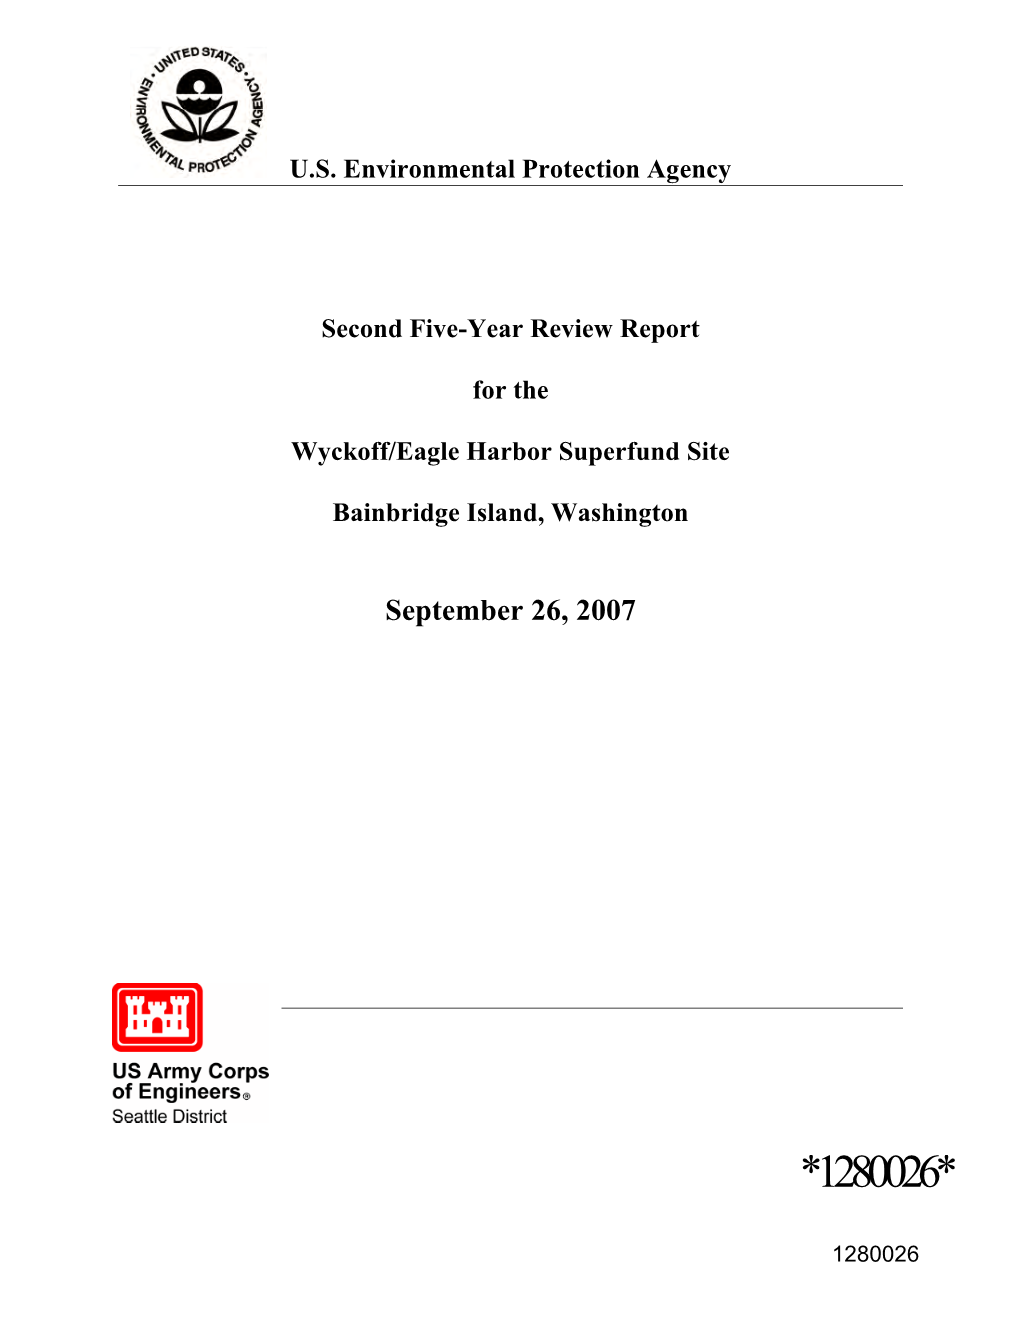 Second Five-Year Review Report for the Wyckoff/Eagle Harbor Superfund Site Was September 26, 2007 Completed